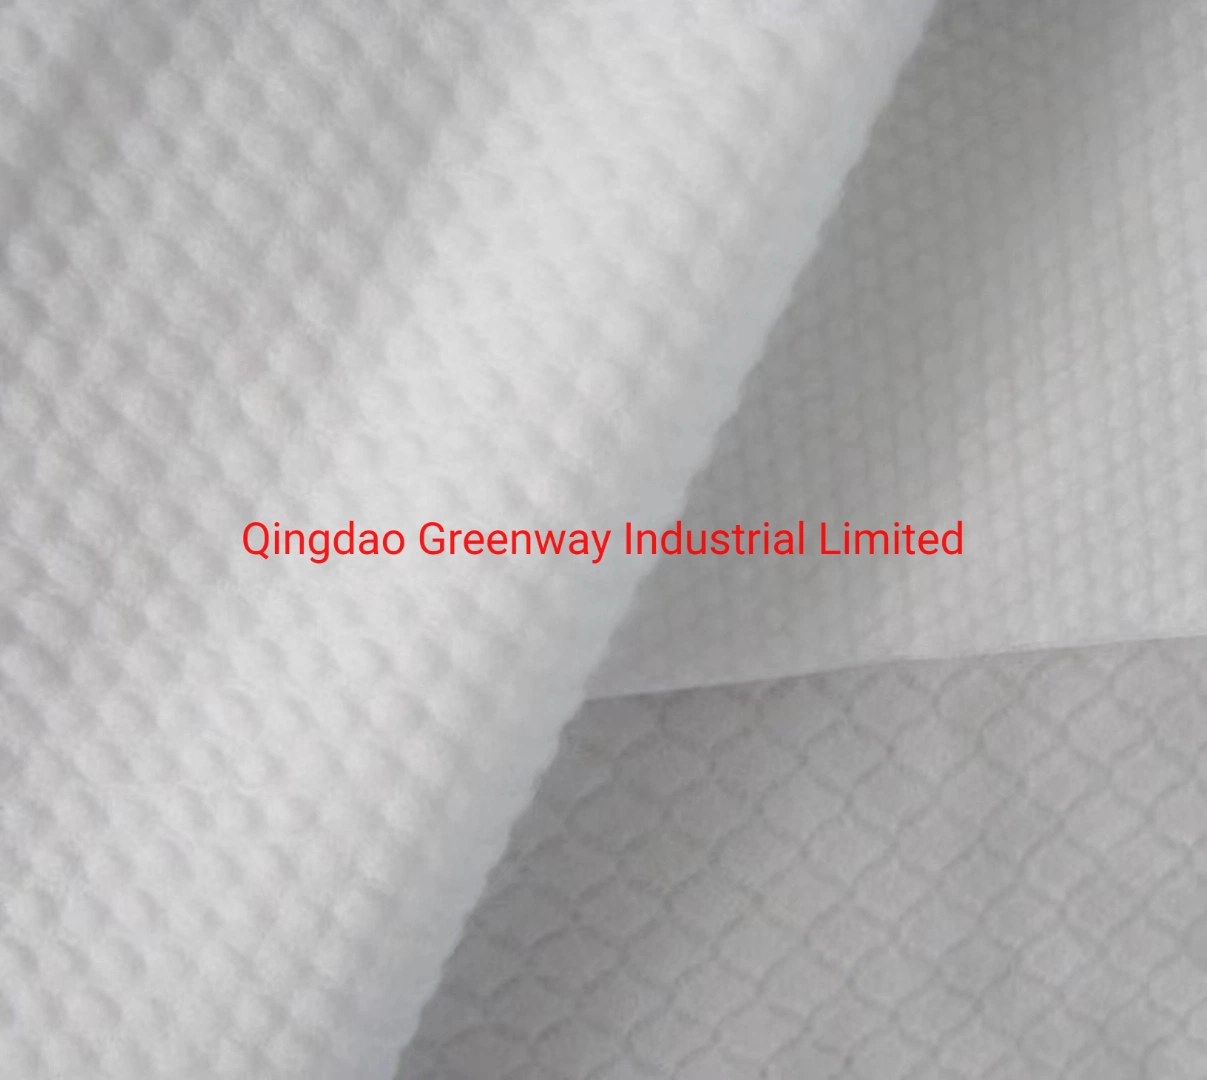 30%Viscose +70%Polyester Spunlace Nonwoven Fabric Use for Wet Wipes